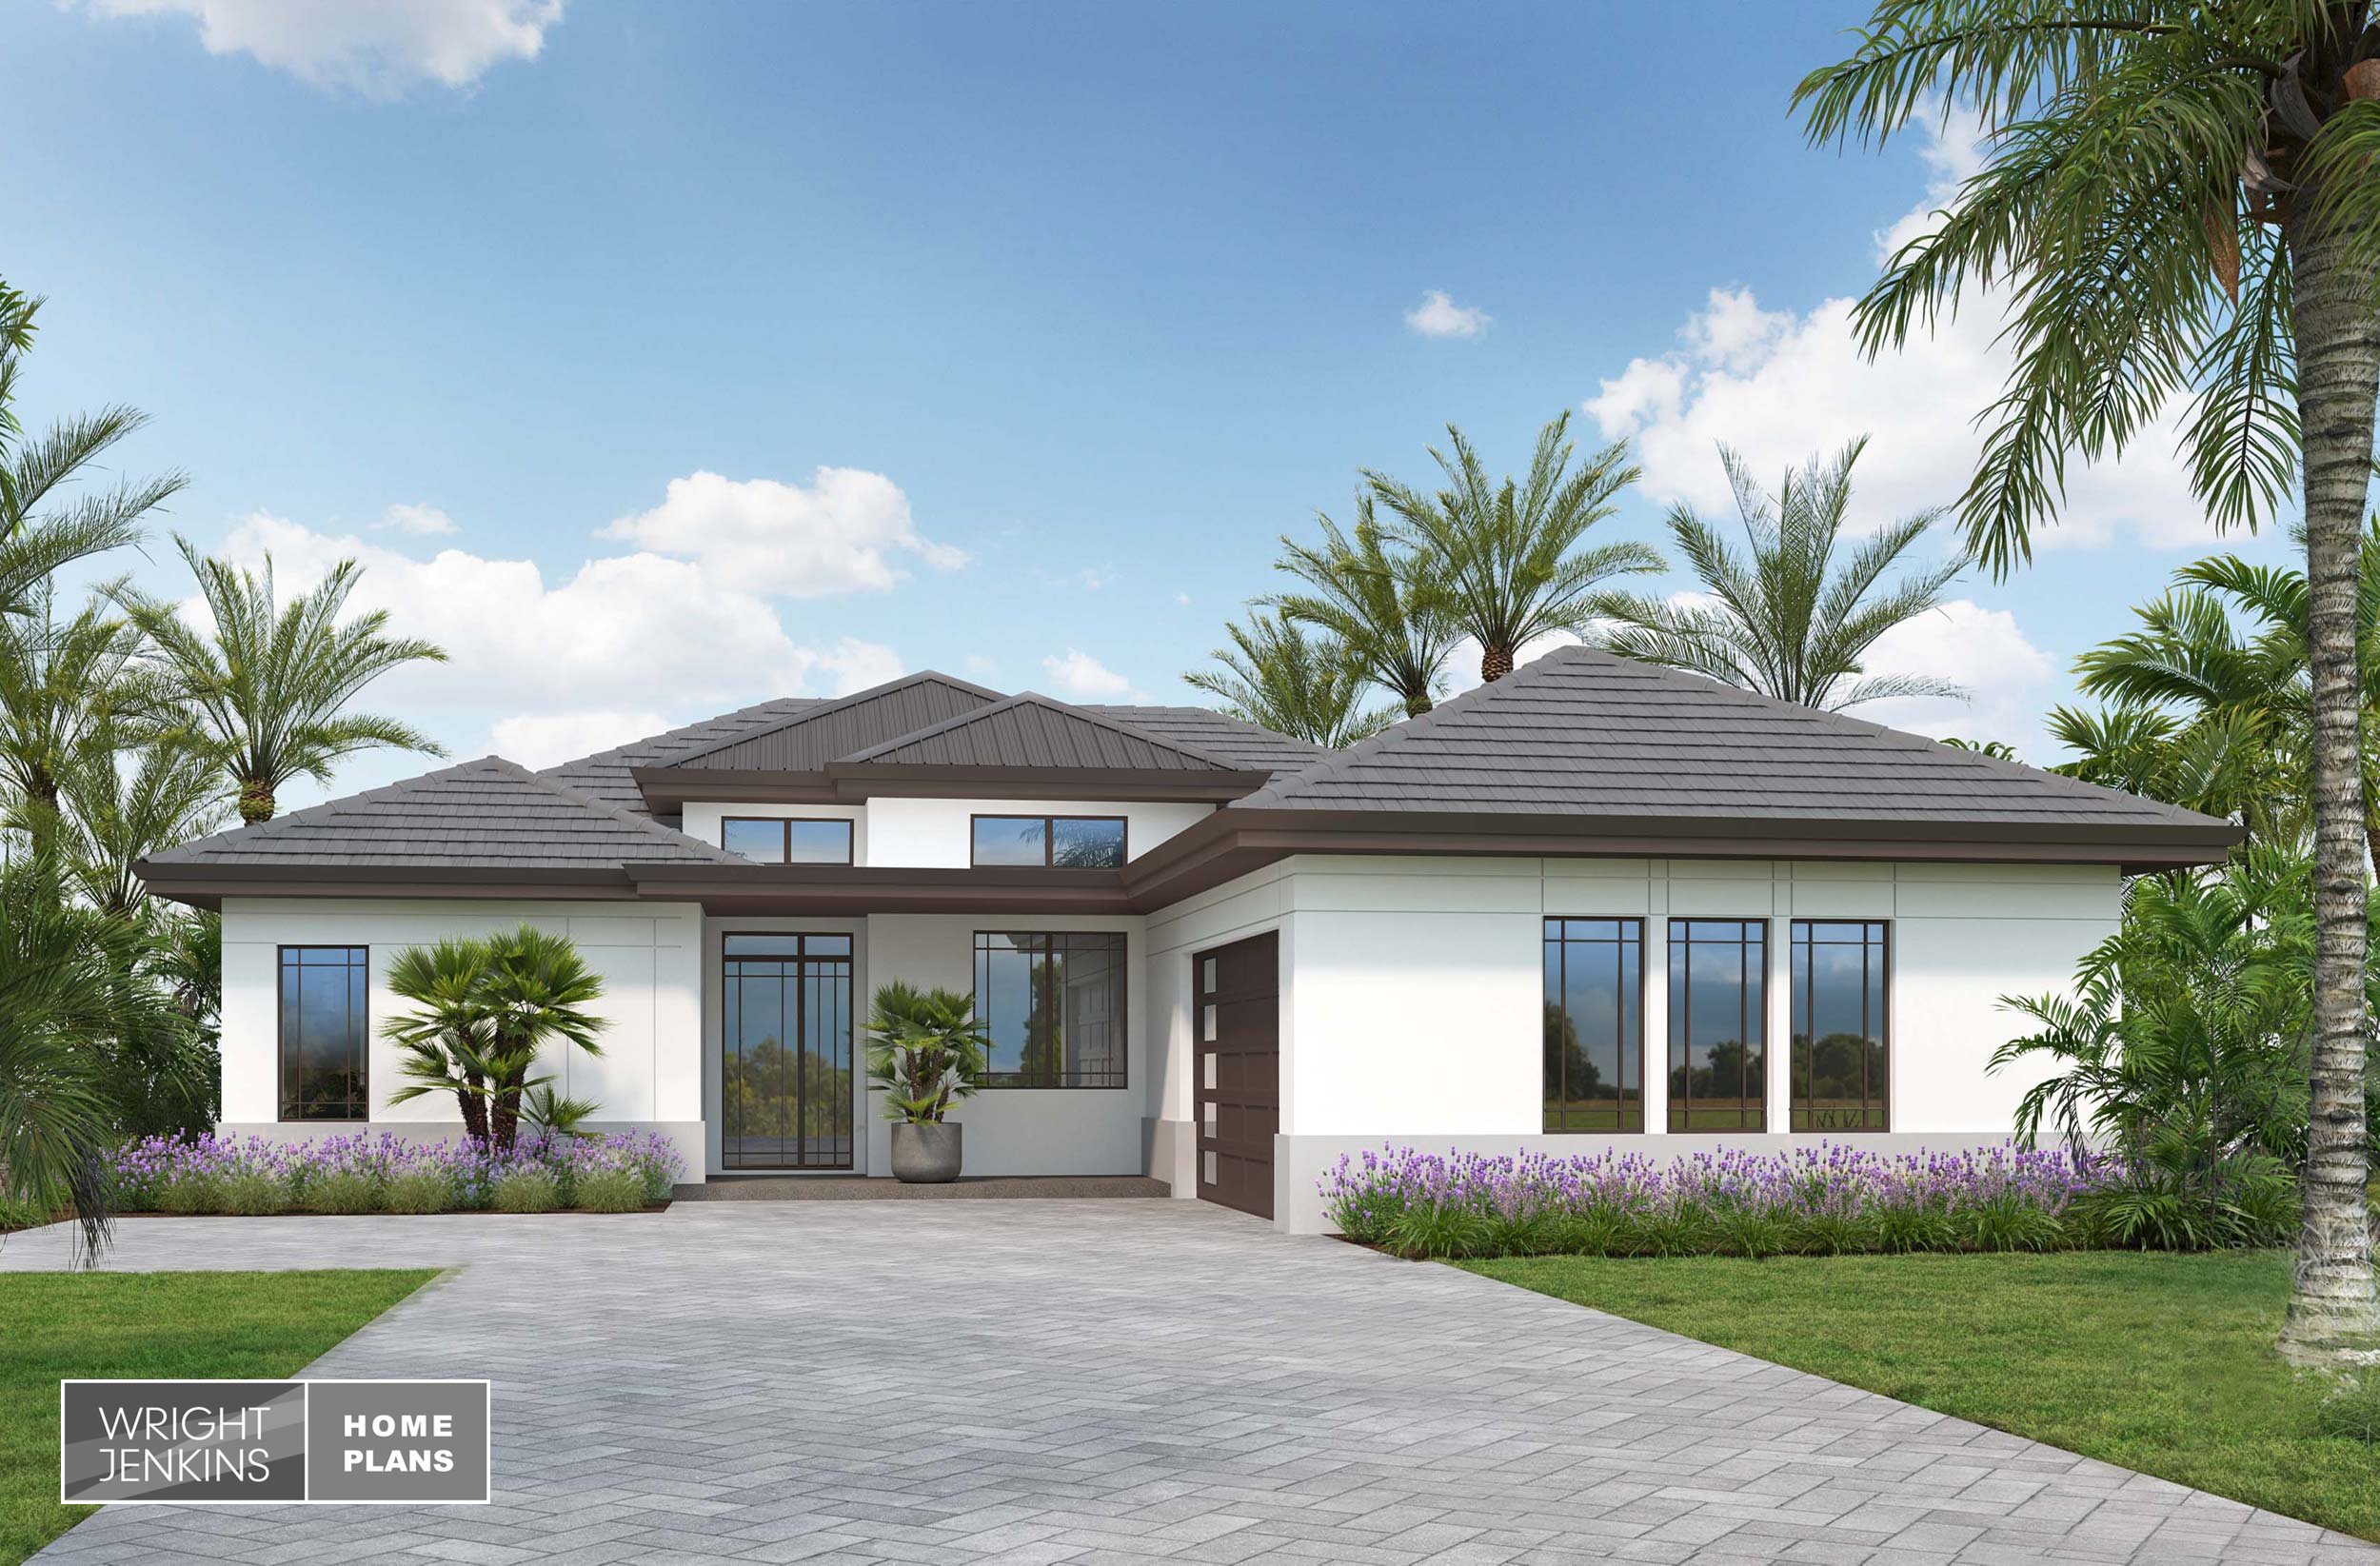    Featured Plan: Starling Home Plan #607   